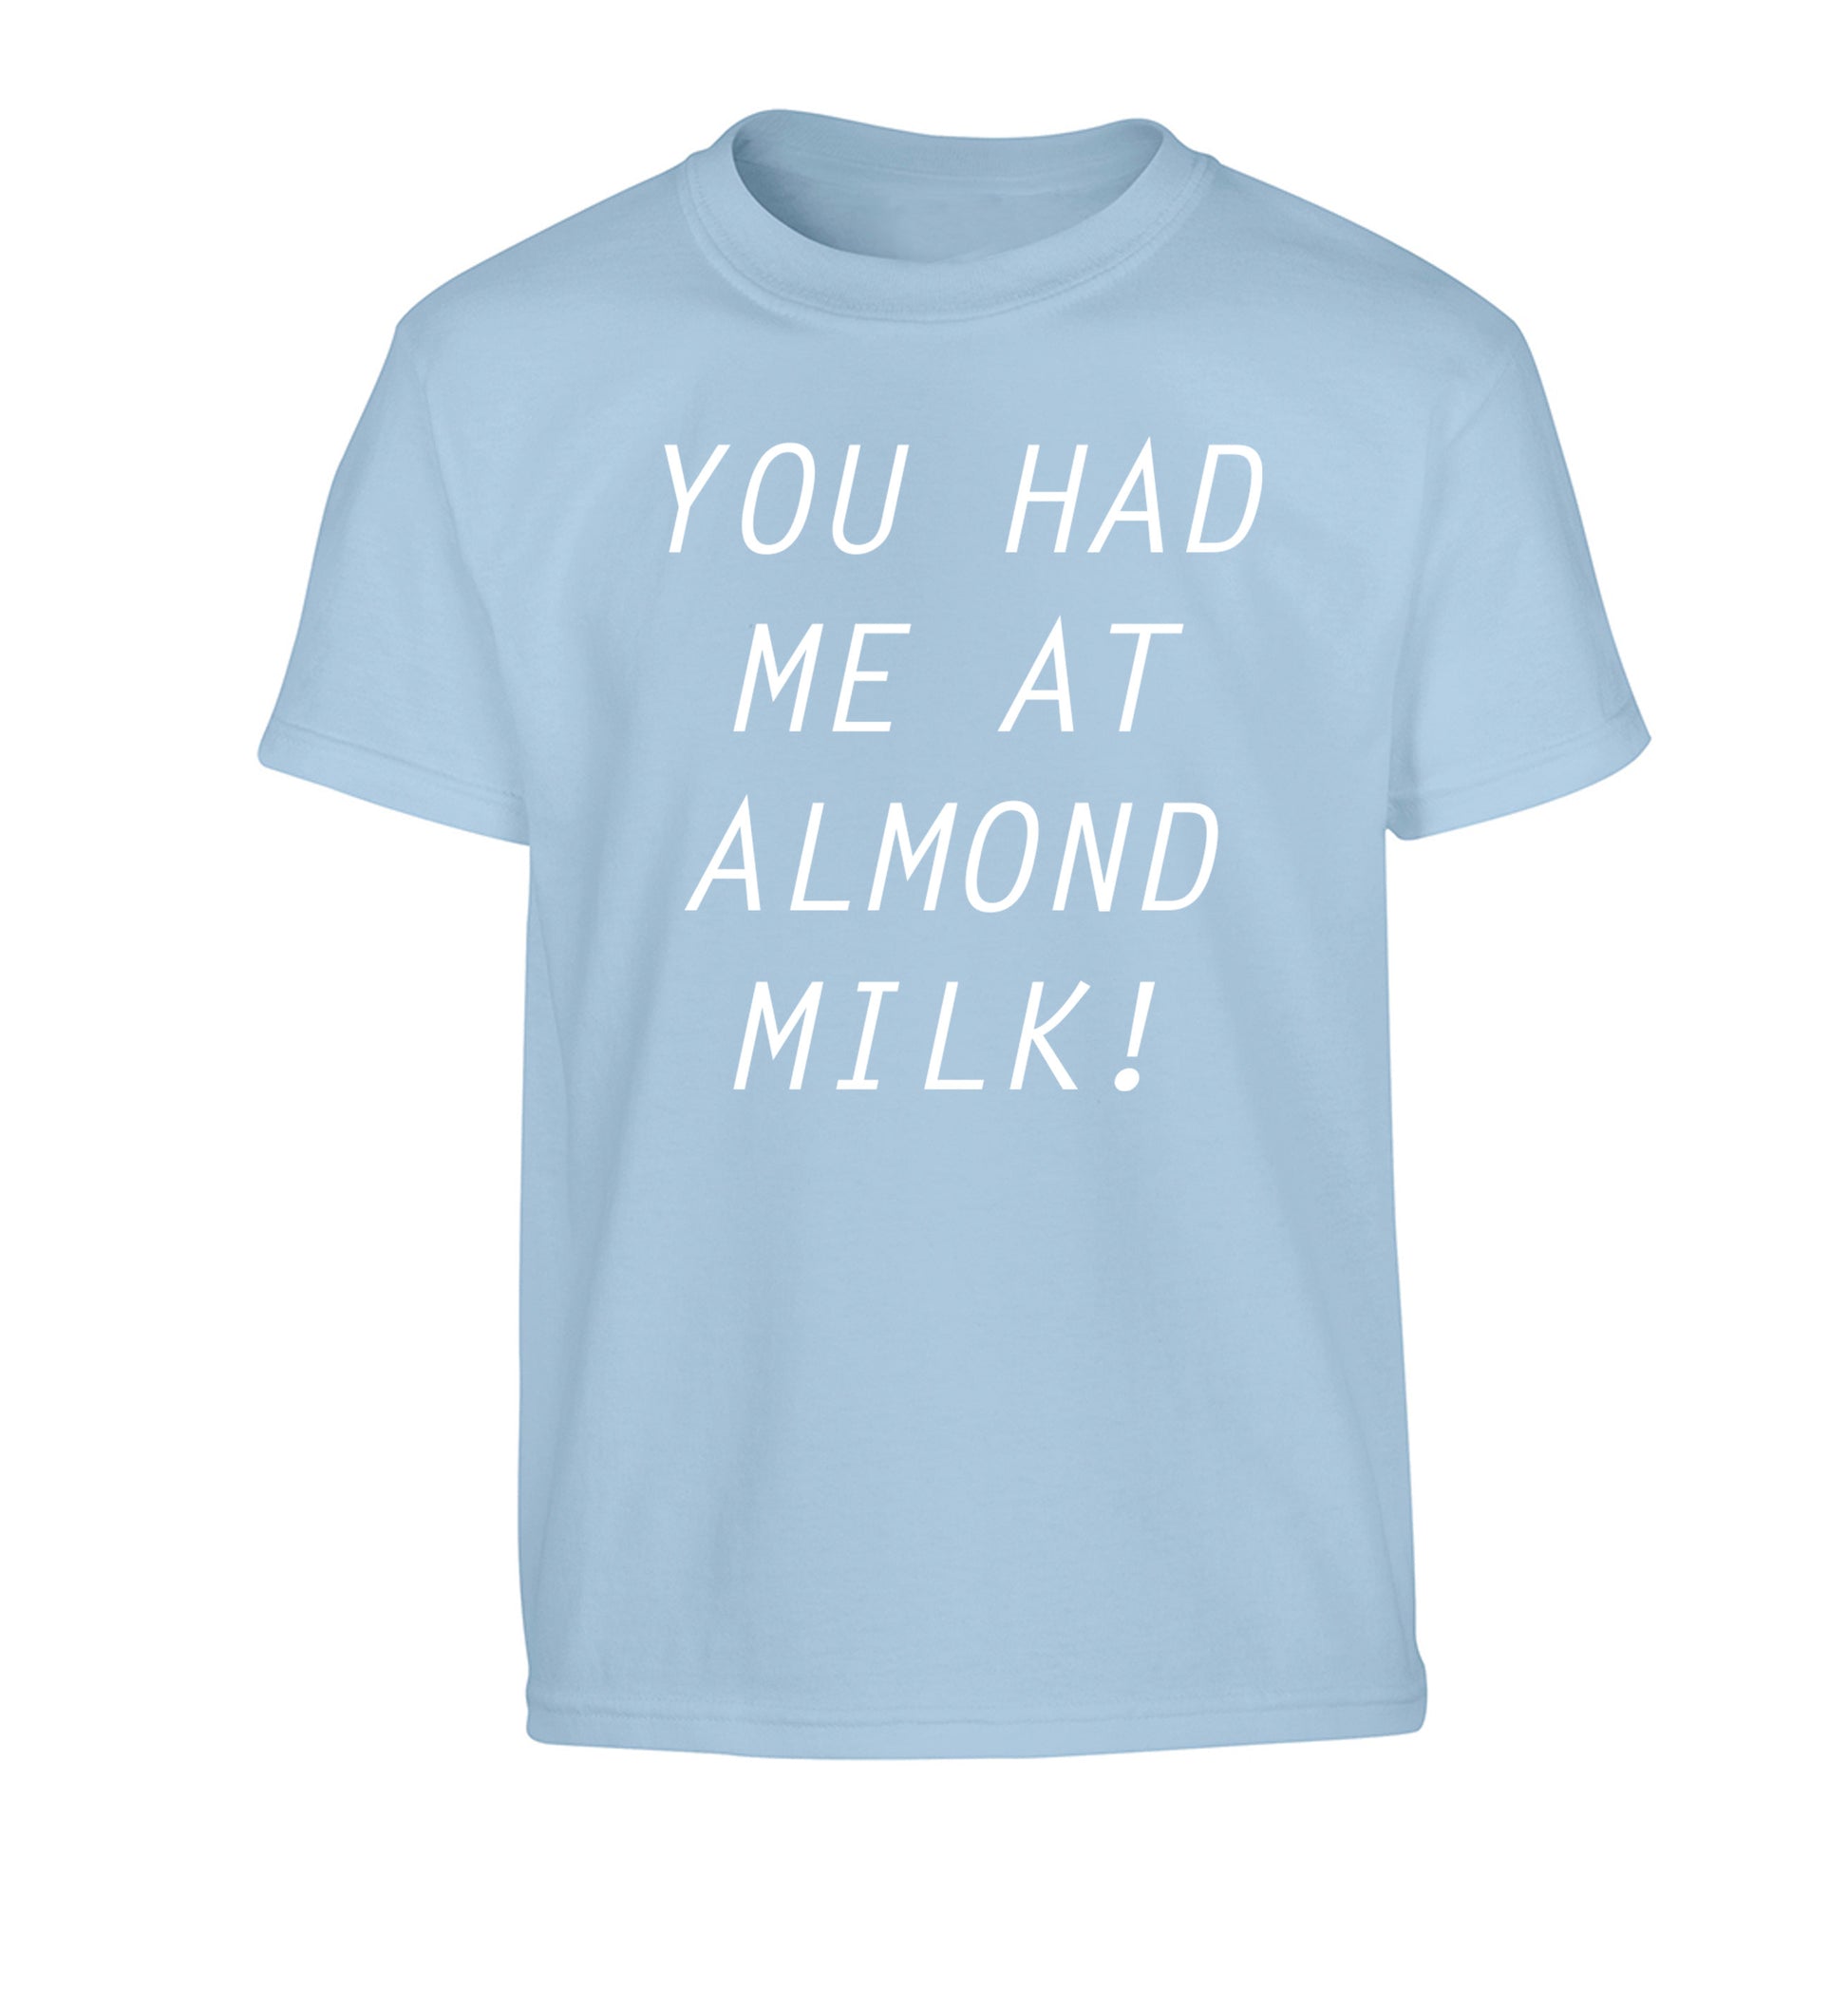 You had me at almond milk Children's light blue Tshirt 12-14 Years